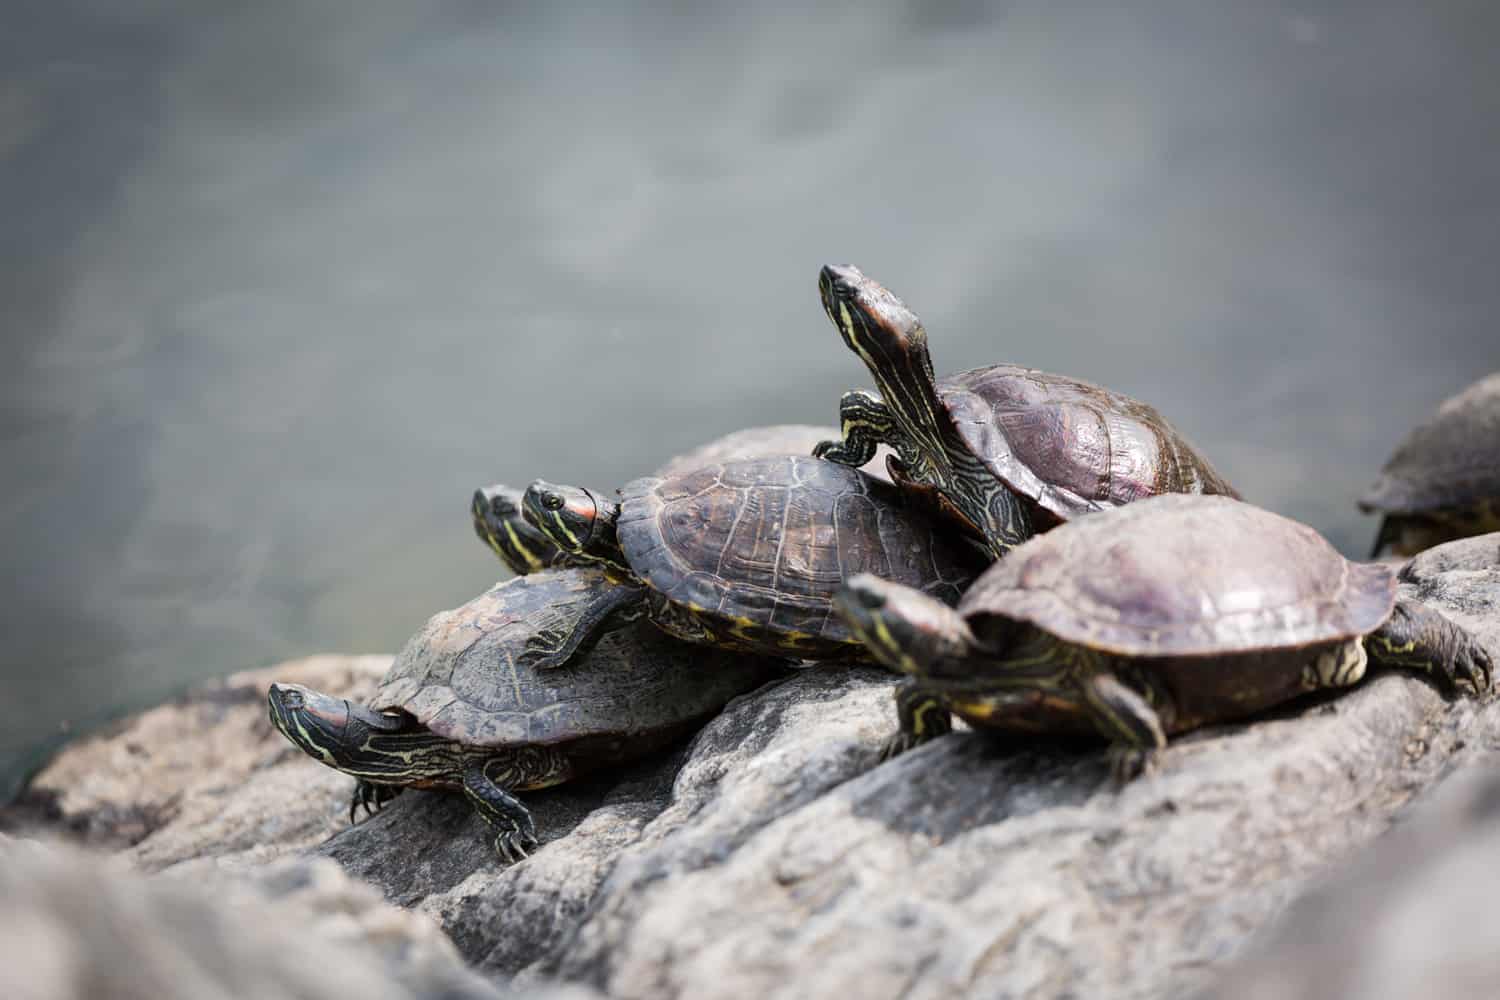 Four turtles sunning on a rock